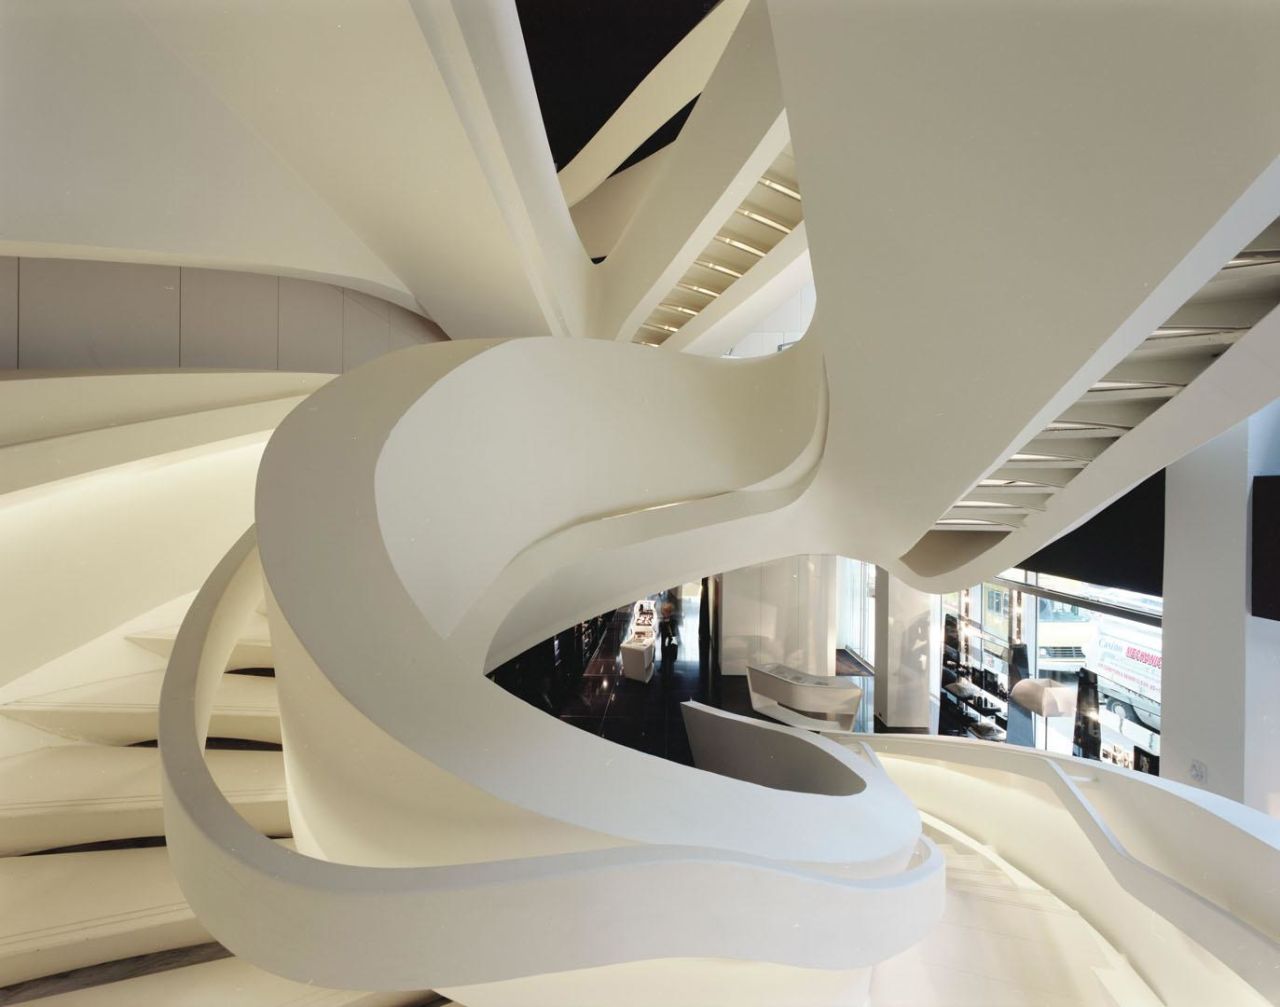 The Armani store on New York's Fifth Avenue is home to a futuristic ribbon-like staircase.